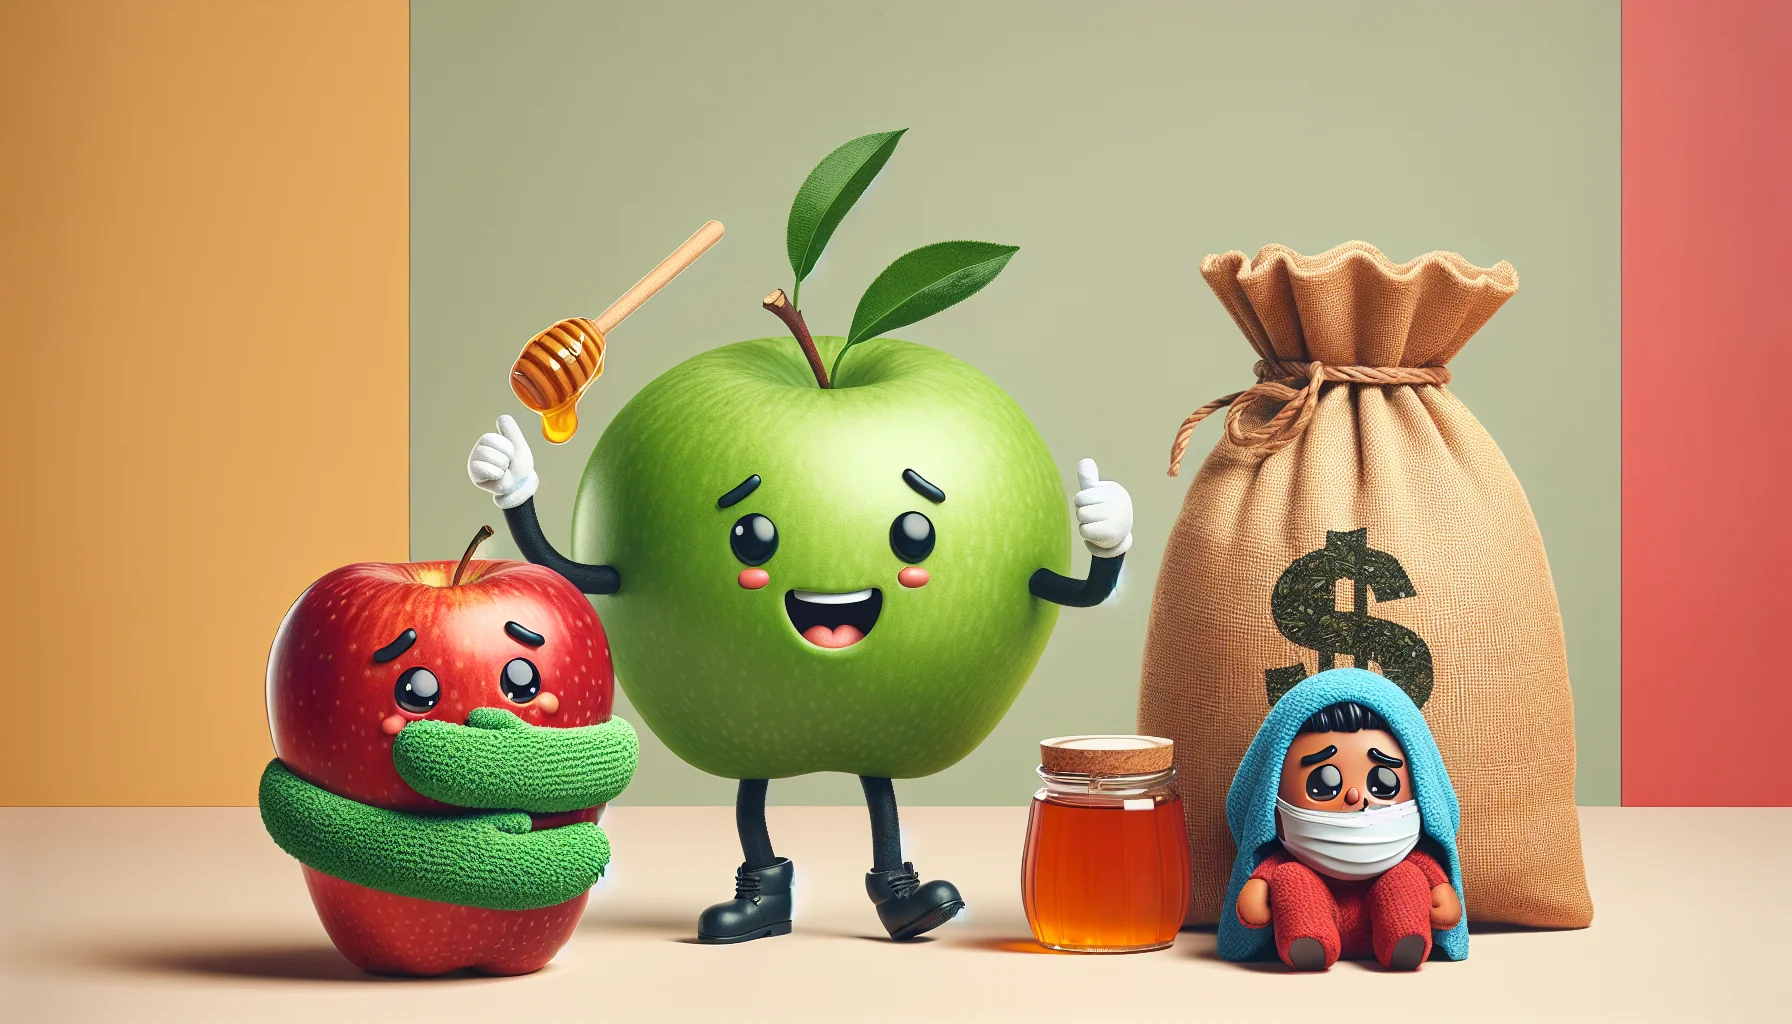 Produce a humorous image encapsulating the concept of using green tea as a remedy for the flu. In this visual story, depict an apple and a honey jar, both with joyful faces, humorously acting out an over-the-top, expensive lifestyle. Simultaneously, show a modest bag of green tea, portrayed as a sensible character offering warmth and care to a person of South Asian descent who appears to be under the weather. Convey through visual elements how relying on green tea for health benefits can be both beneficial and financially savvy.